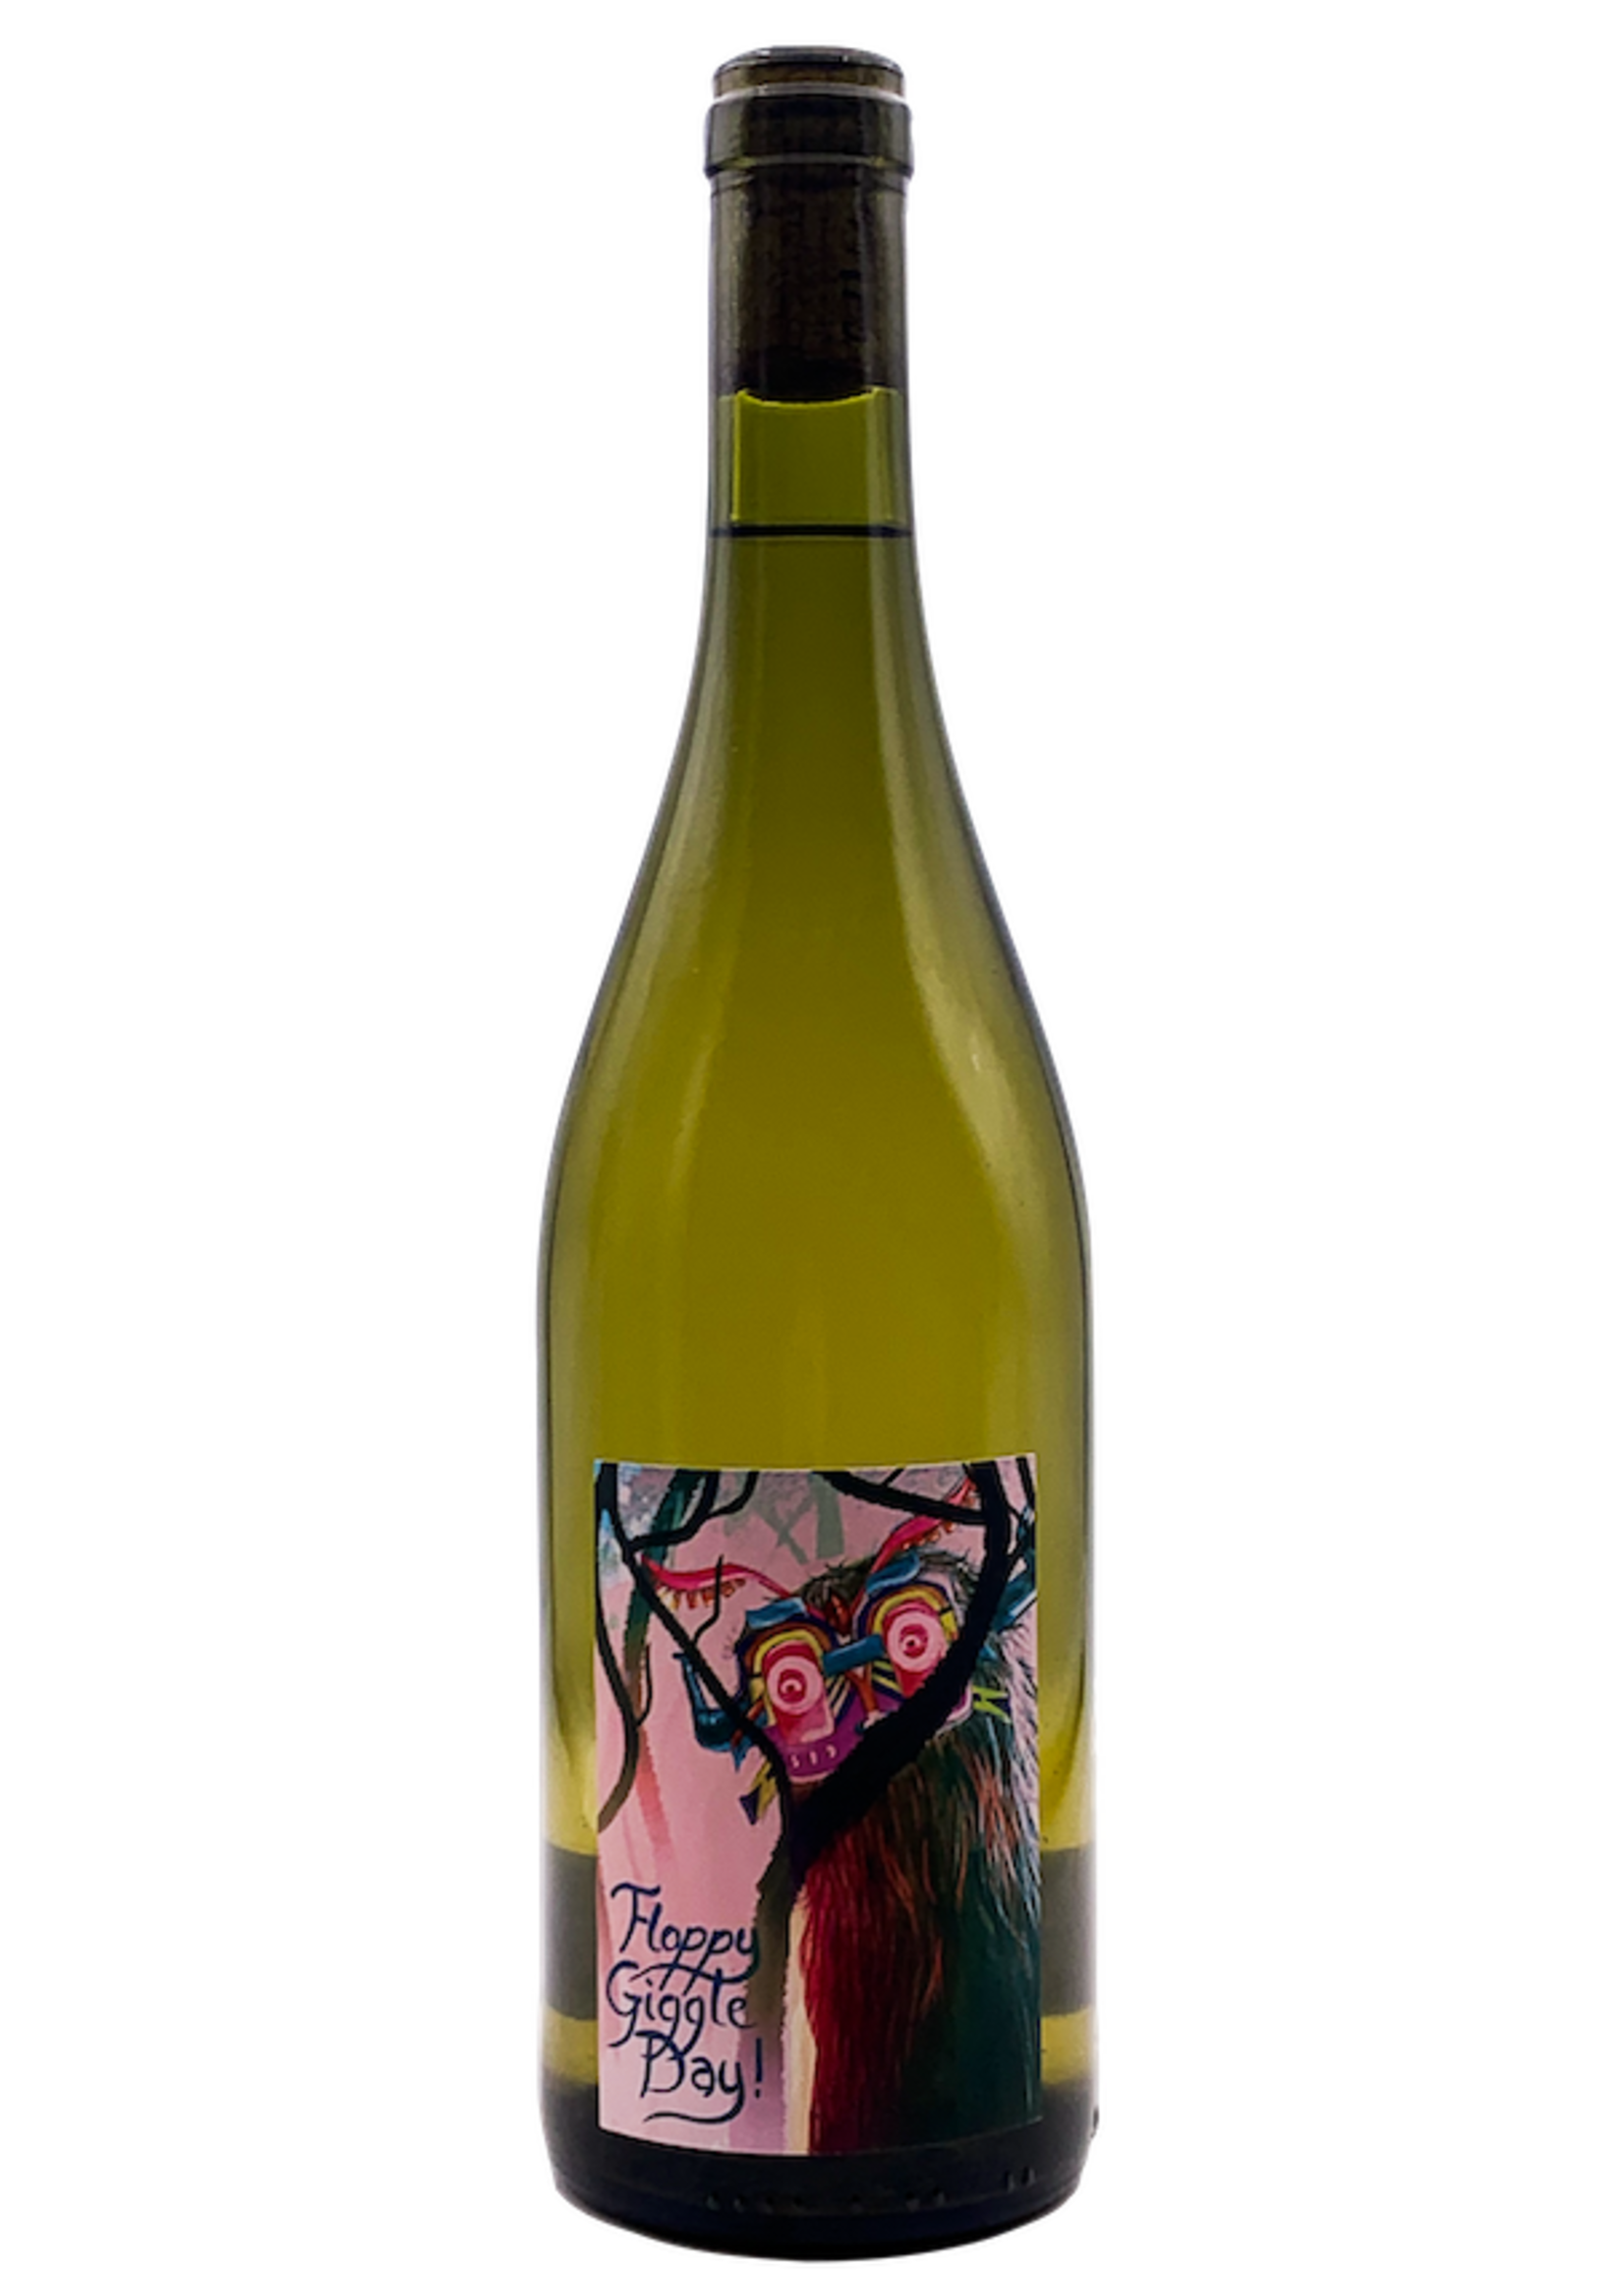 Semillon "Floppy Giggle Day" 2019 Good Intentions Wine Co.